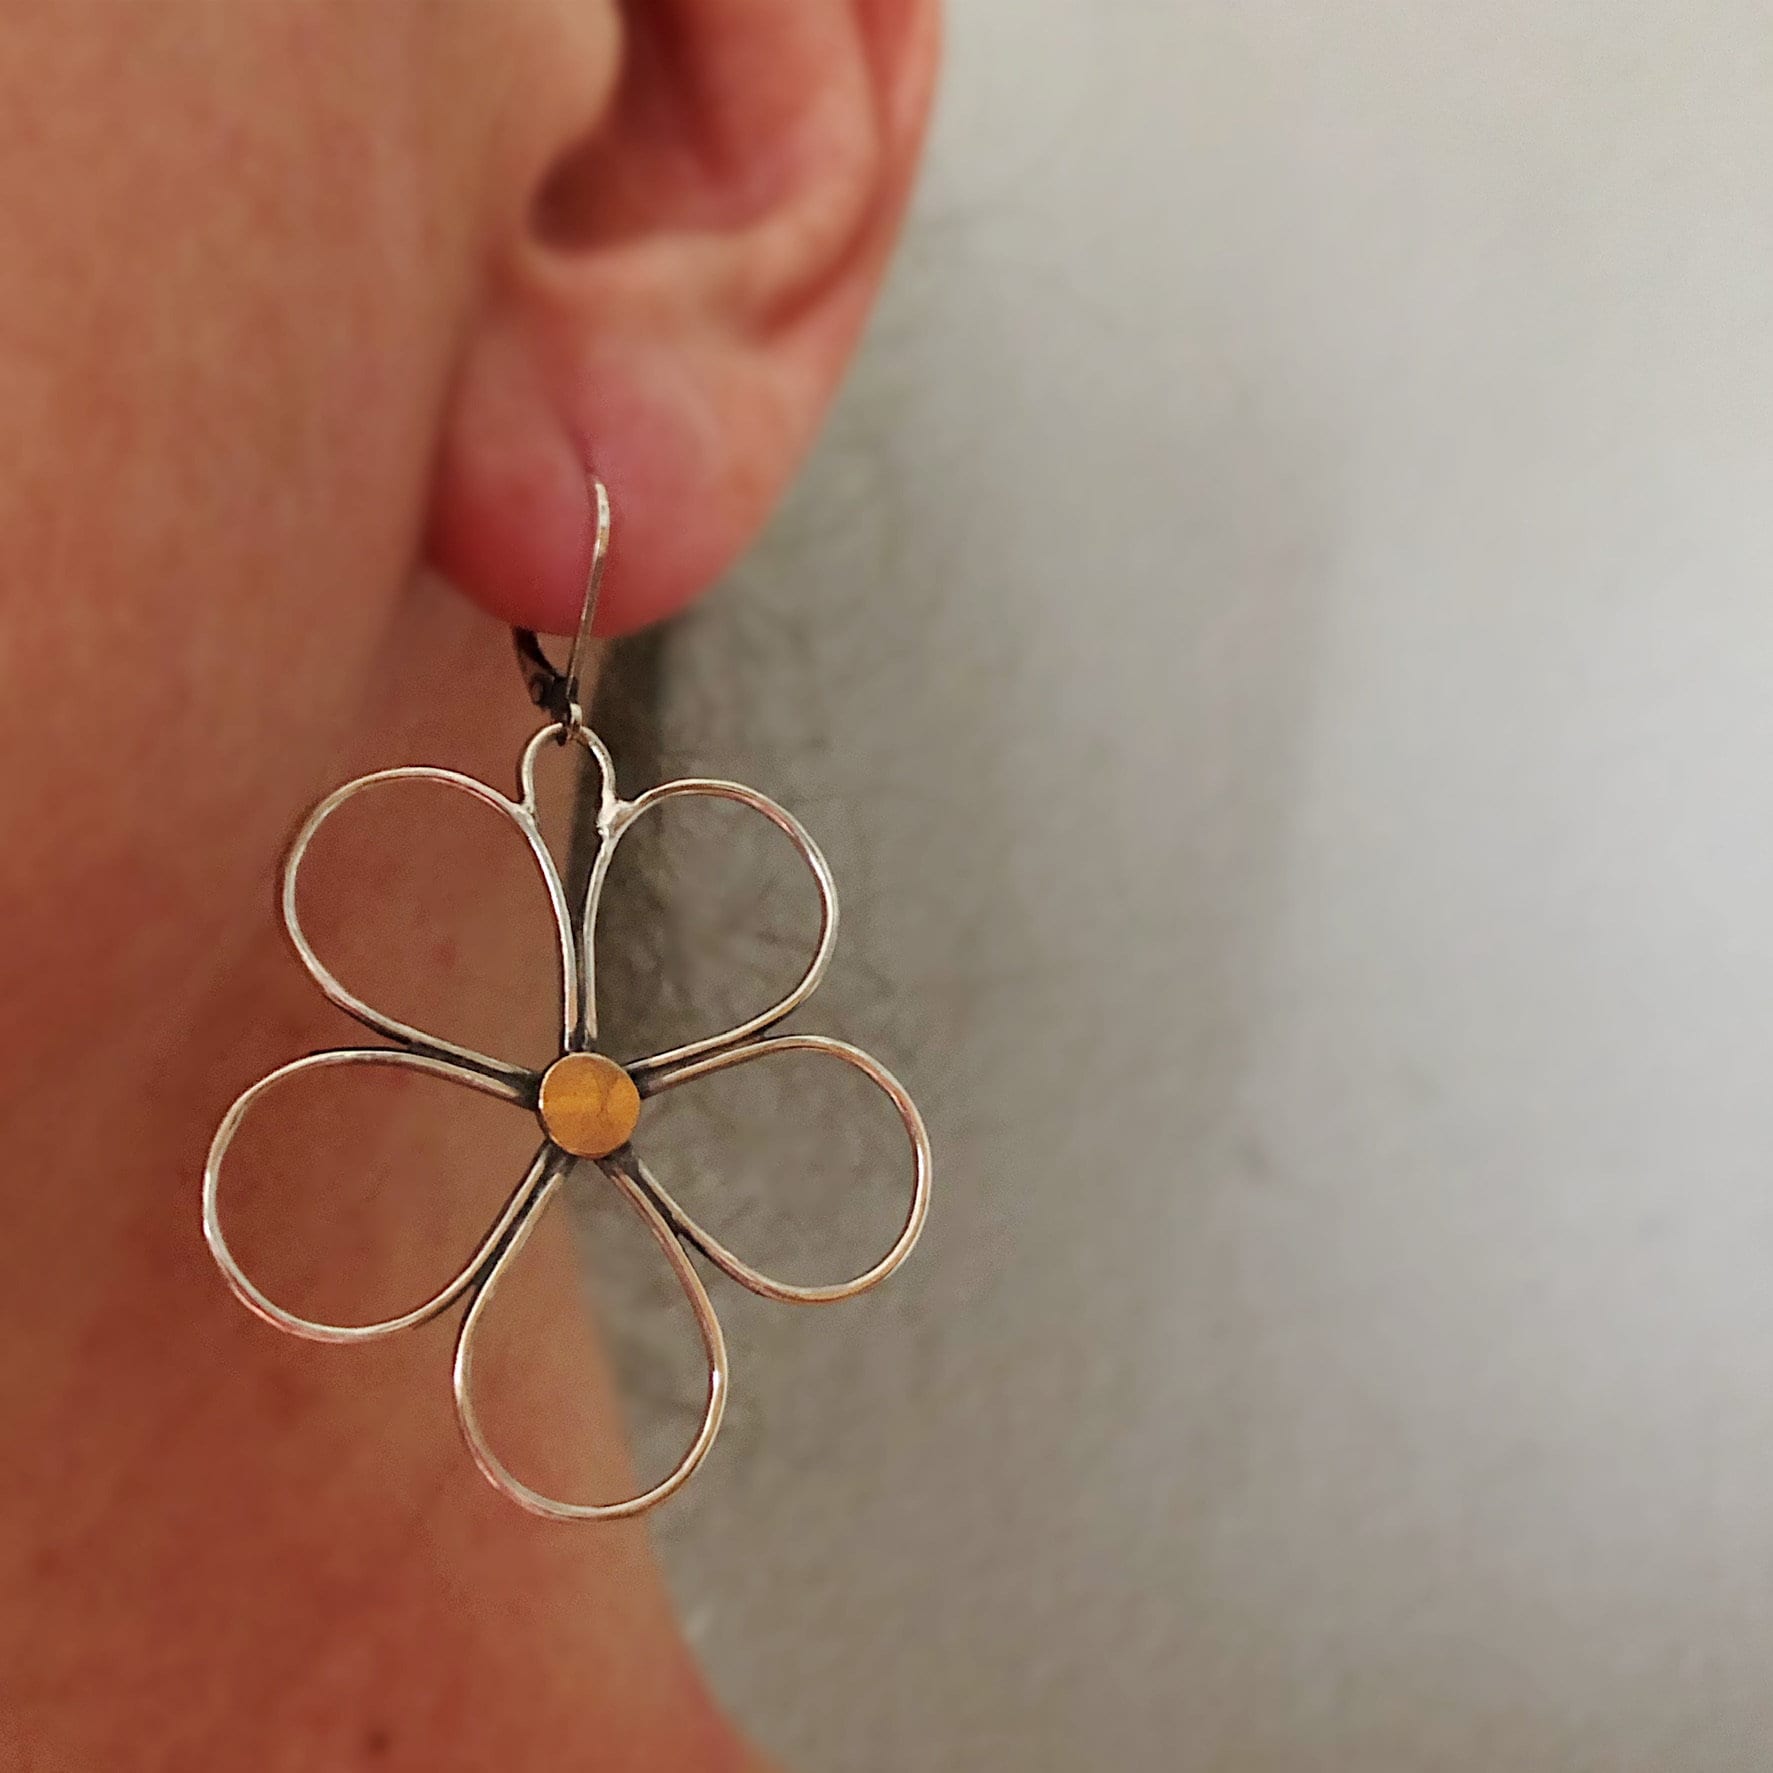 Large Sterling Silver Flower Earrings with 14k Yellow Gold Center for  Women, On Lever Back Ear Wire, Boho Style